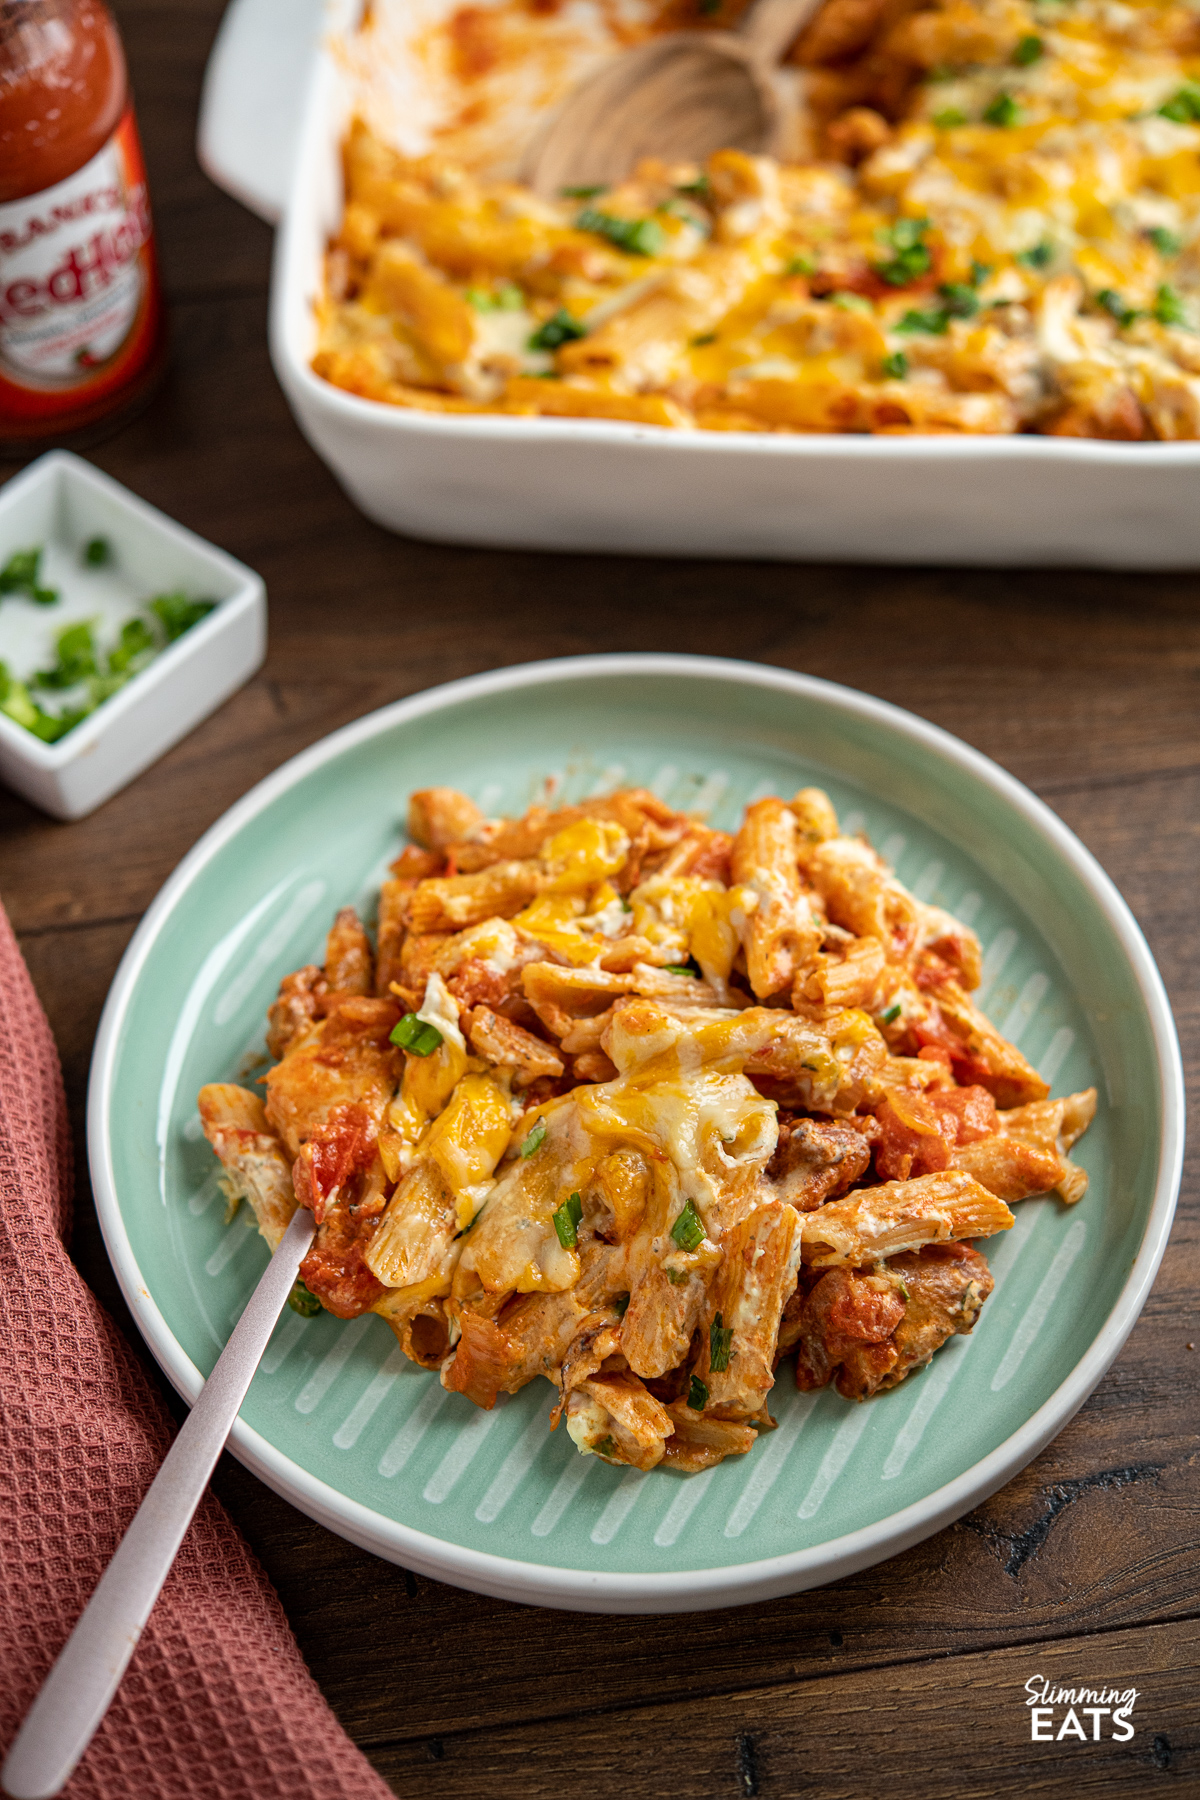 A serving of Buffalo Chicken Pasta Bake on a turquoise plate with fork, white baking dish with pasta bake in background and Frank's Red Hot Sauce